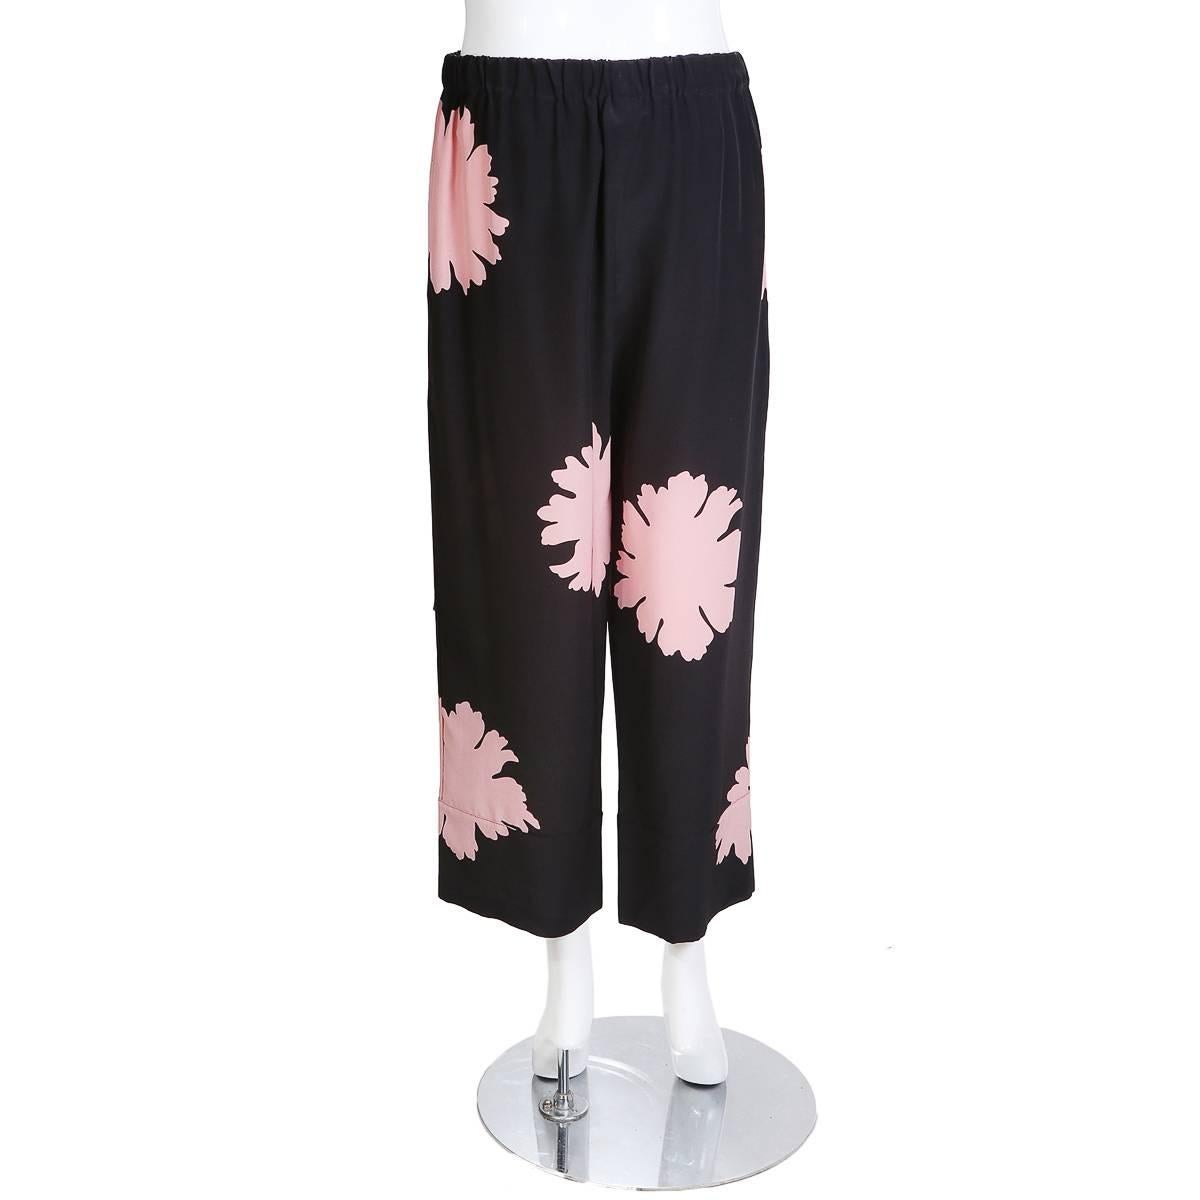 Cropped pants from Alexander McQueen with drawstring waist.  100% silk

Size 42
32